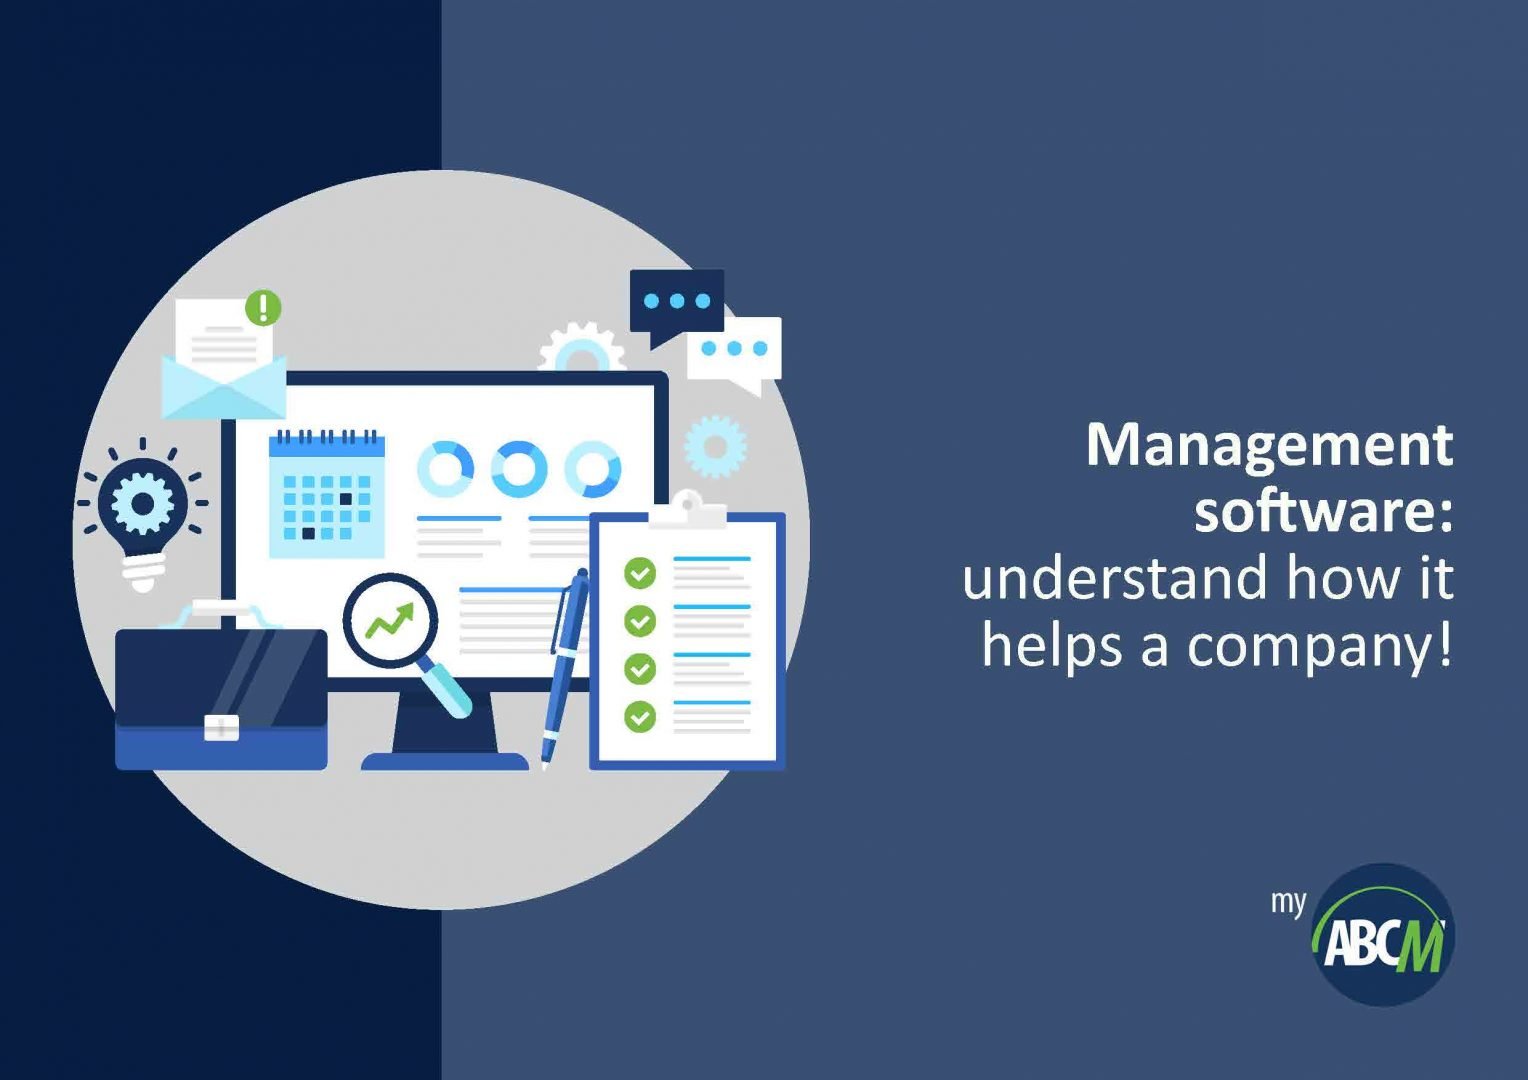 Management software: understand how it helps a company!